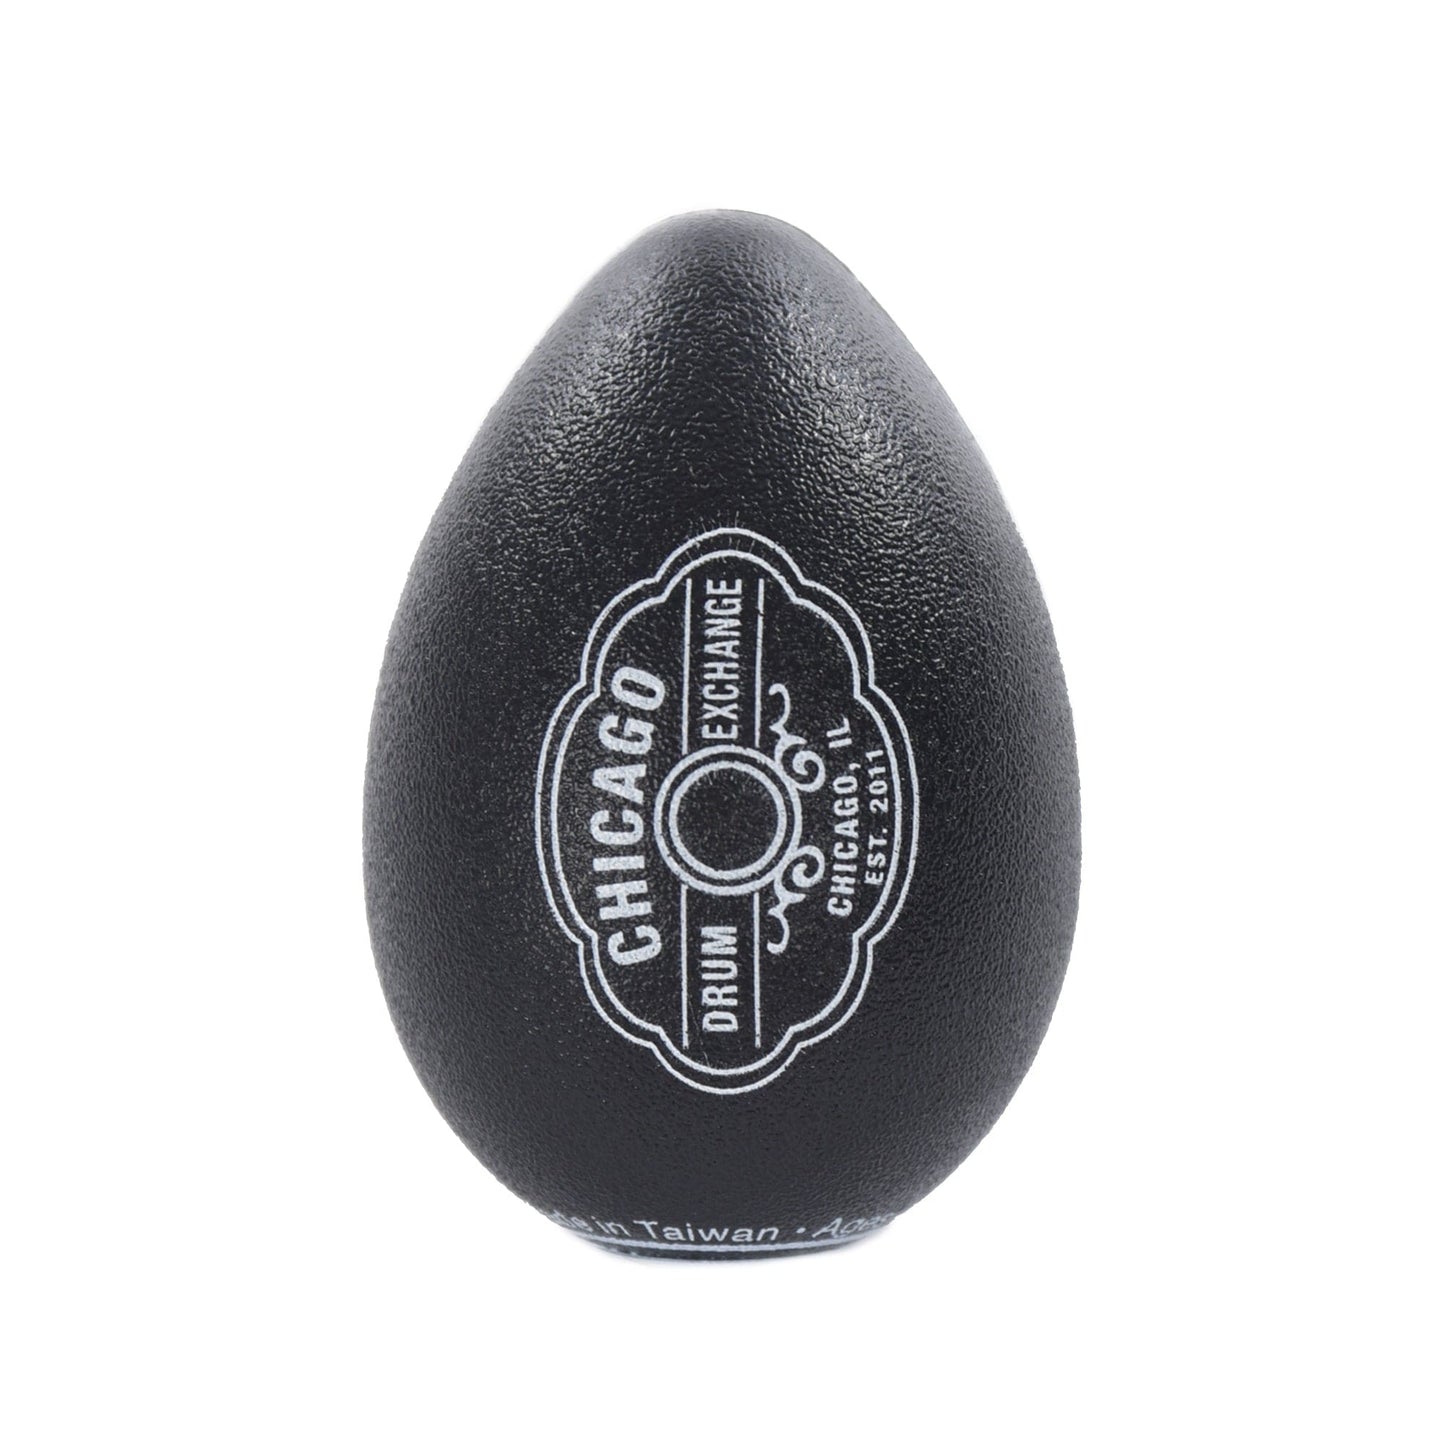 LP CDE Logo Single Egg Shaker Black Drums and Percussion / Auxiliary Percussion